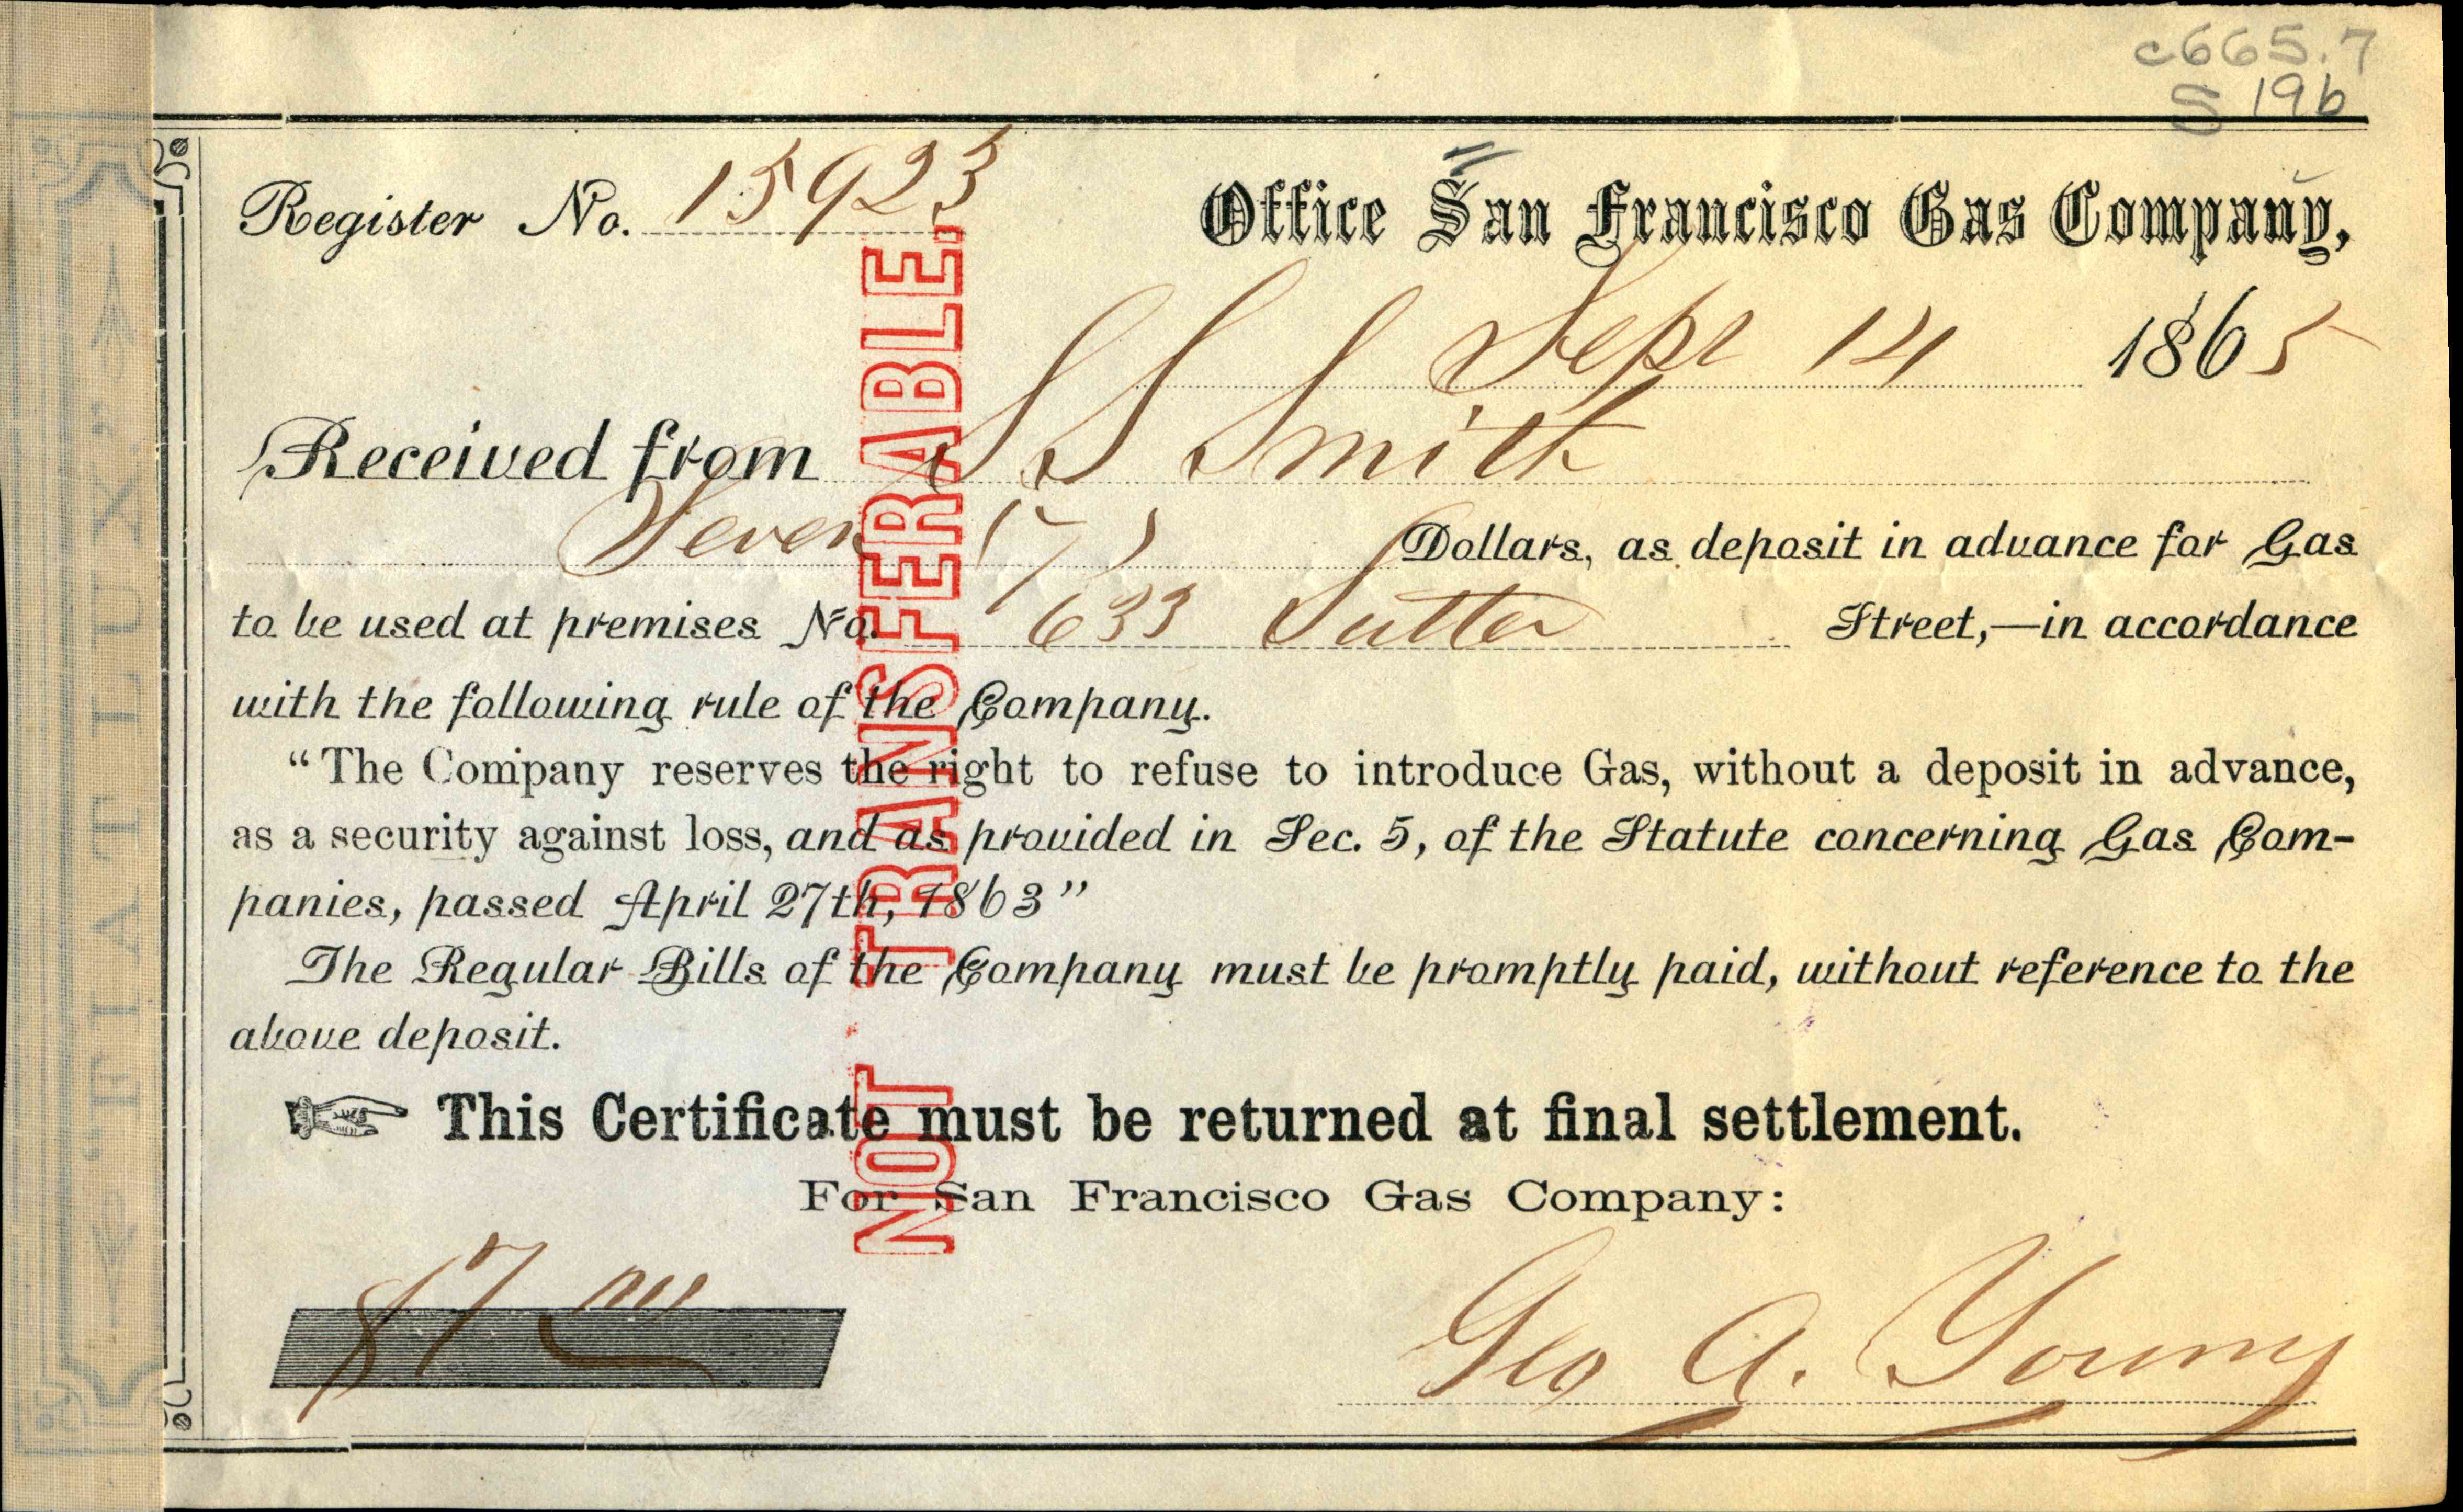 Receipt for payment to  San Francisco Gas company